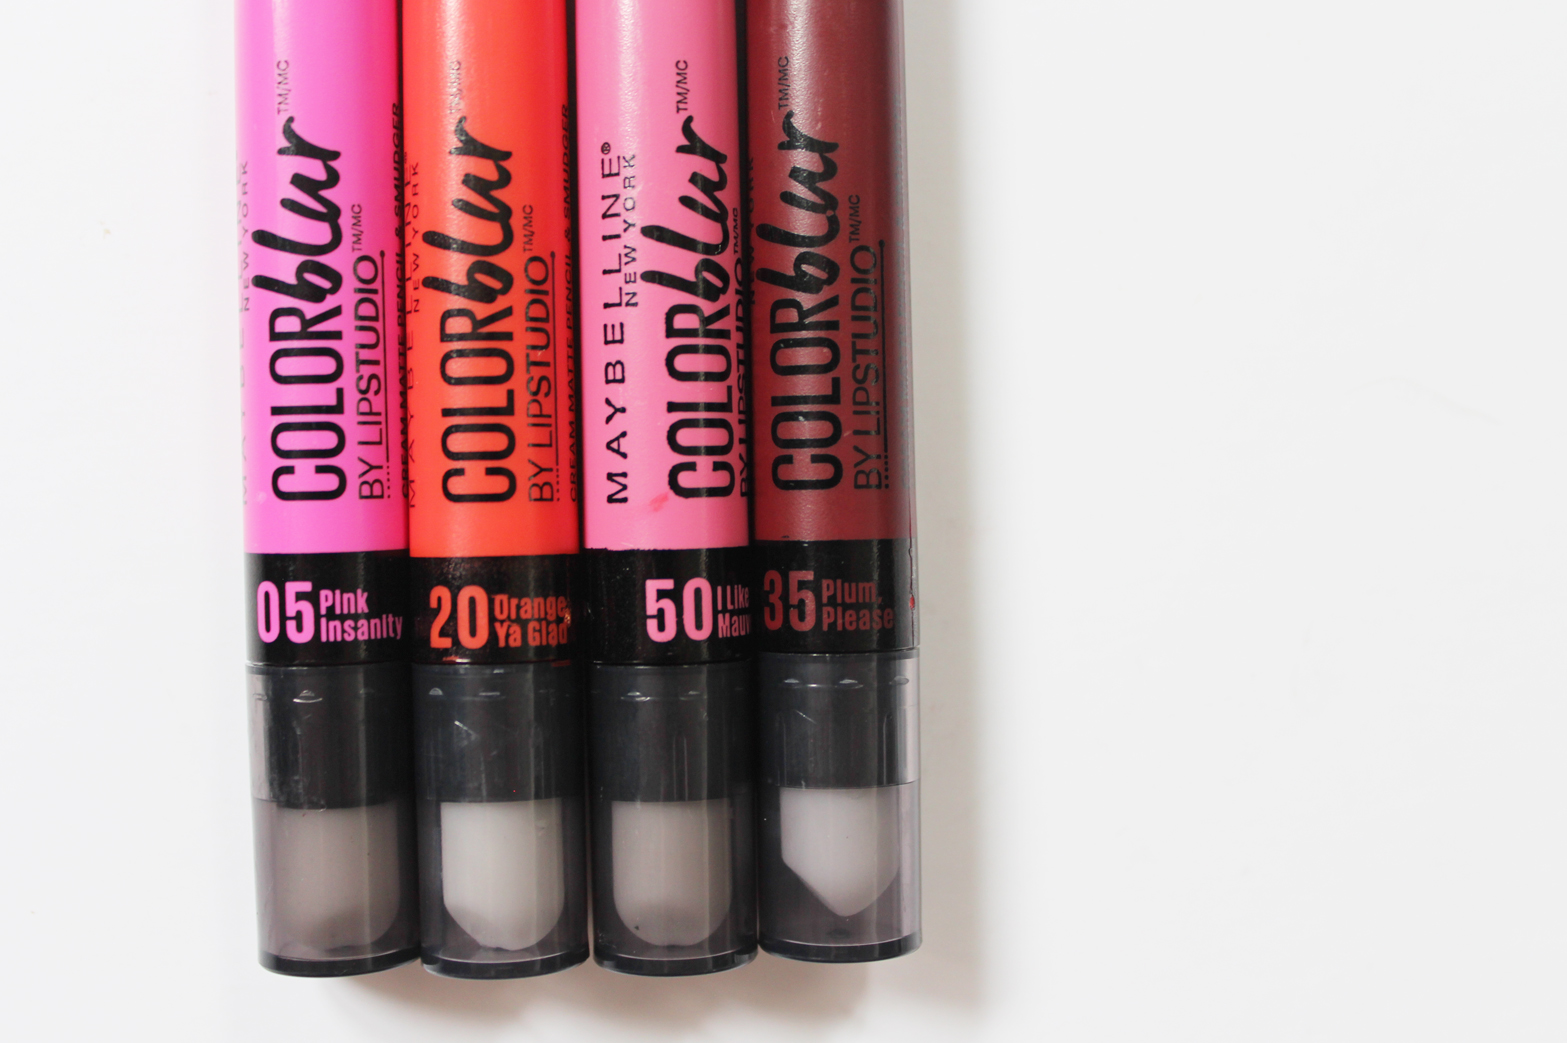 MAYBELLINE | Color Blur by Lip Studio Cream Matte Pencil - Review + Swatches - CassandraMyee